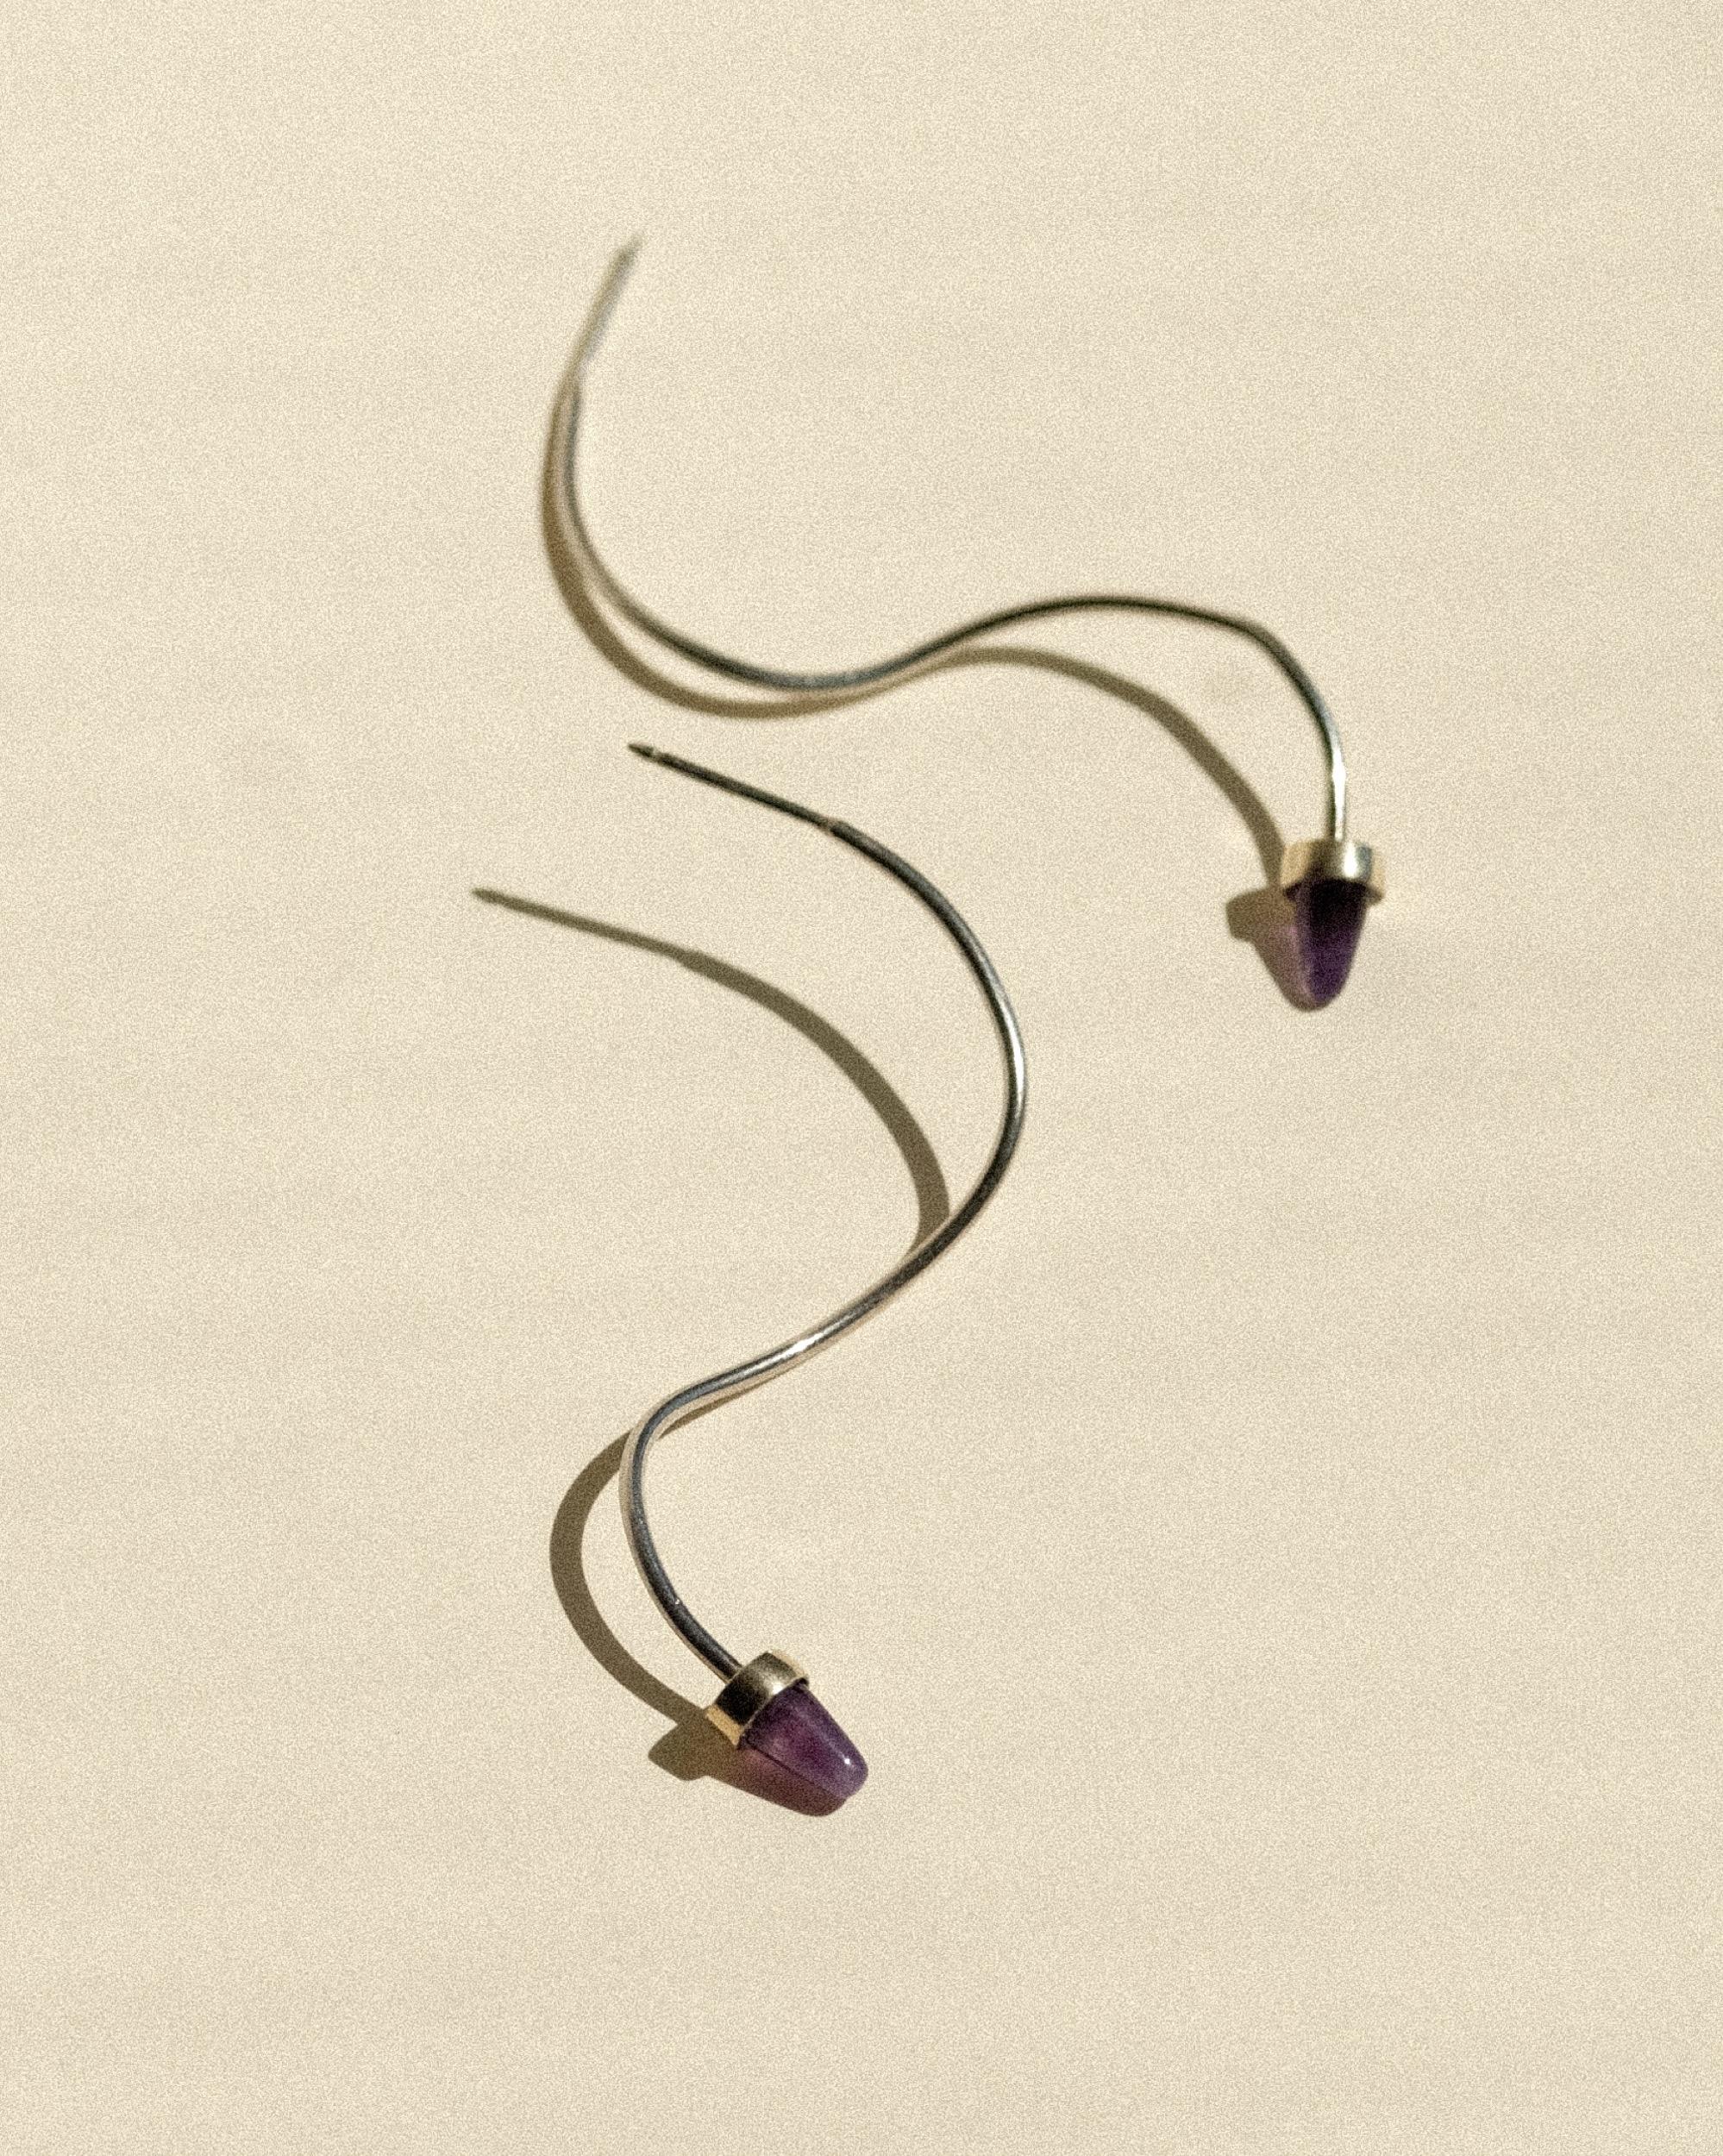 Amethyst, Vermeil, and Sterling Silver Earrings
From an unknown maker
Unsigned
Each Measuring 2.5 Inches In Length 
0.75 Inches In Width Span
Weighing 1.75 Grams Per Earring
In Excellent Condition.